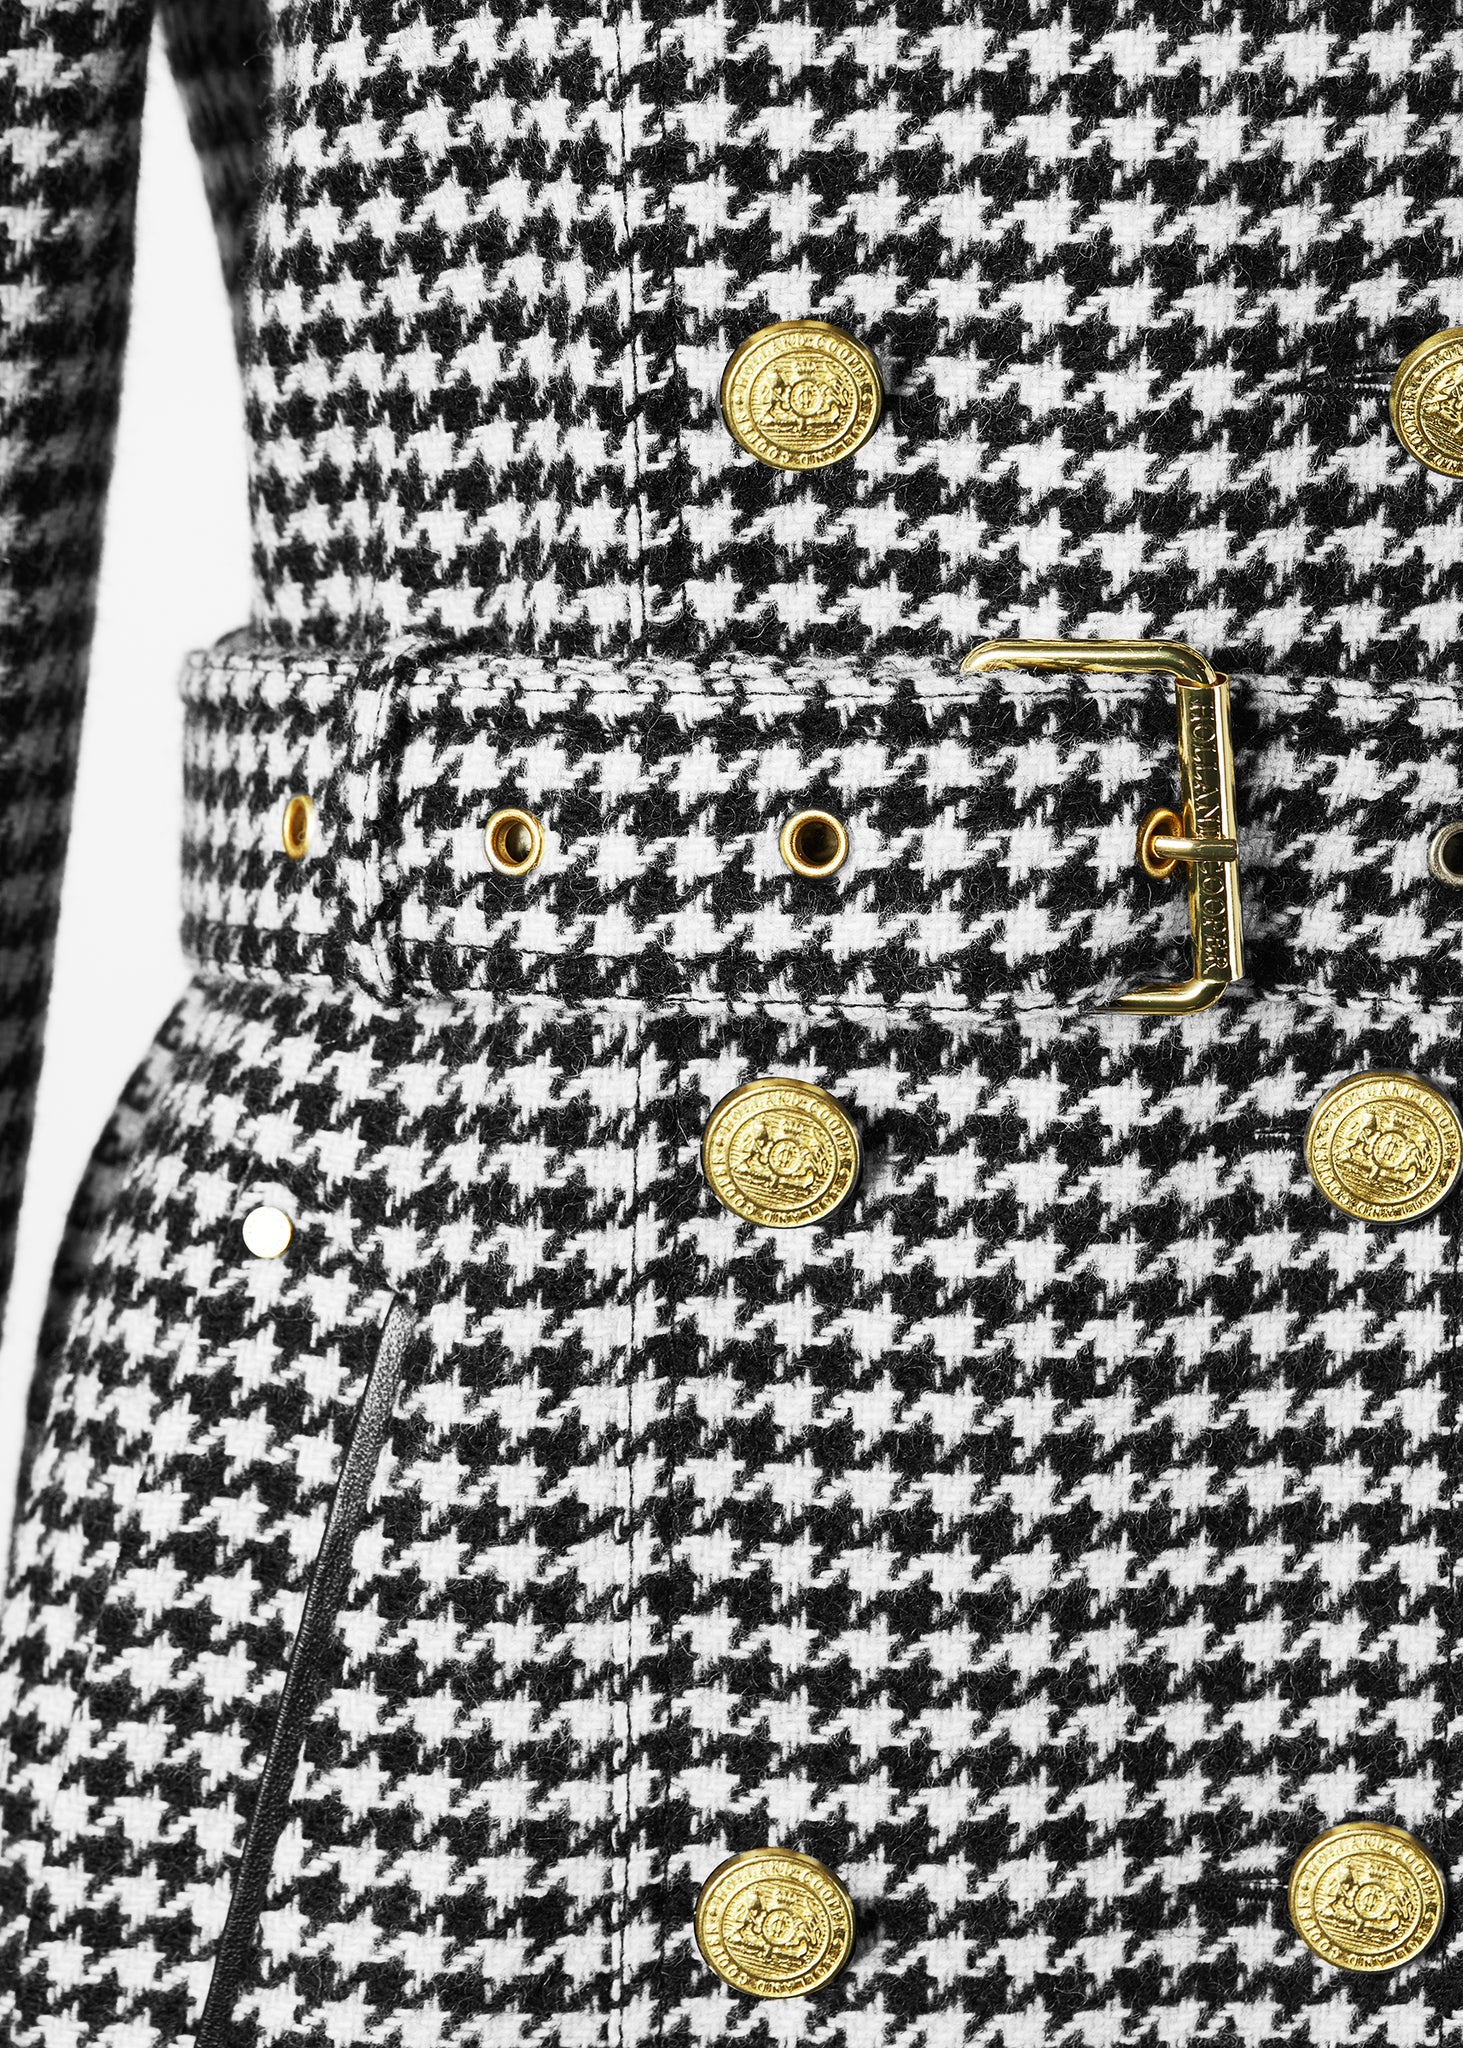 Gold button and belt detail on womens black and white houndstooth double breasted full length trench coat with black faux fur collar and cuffs